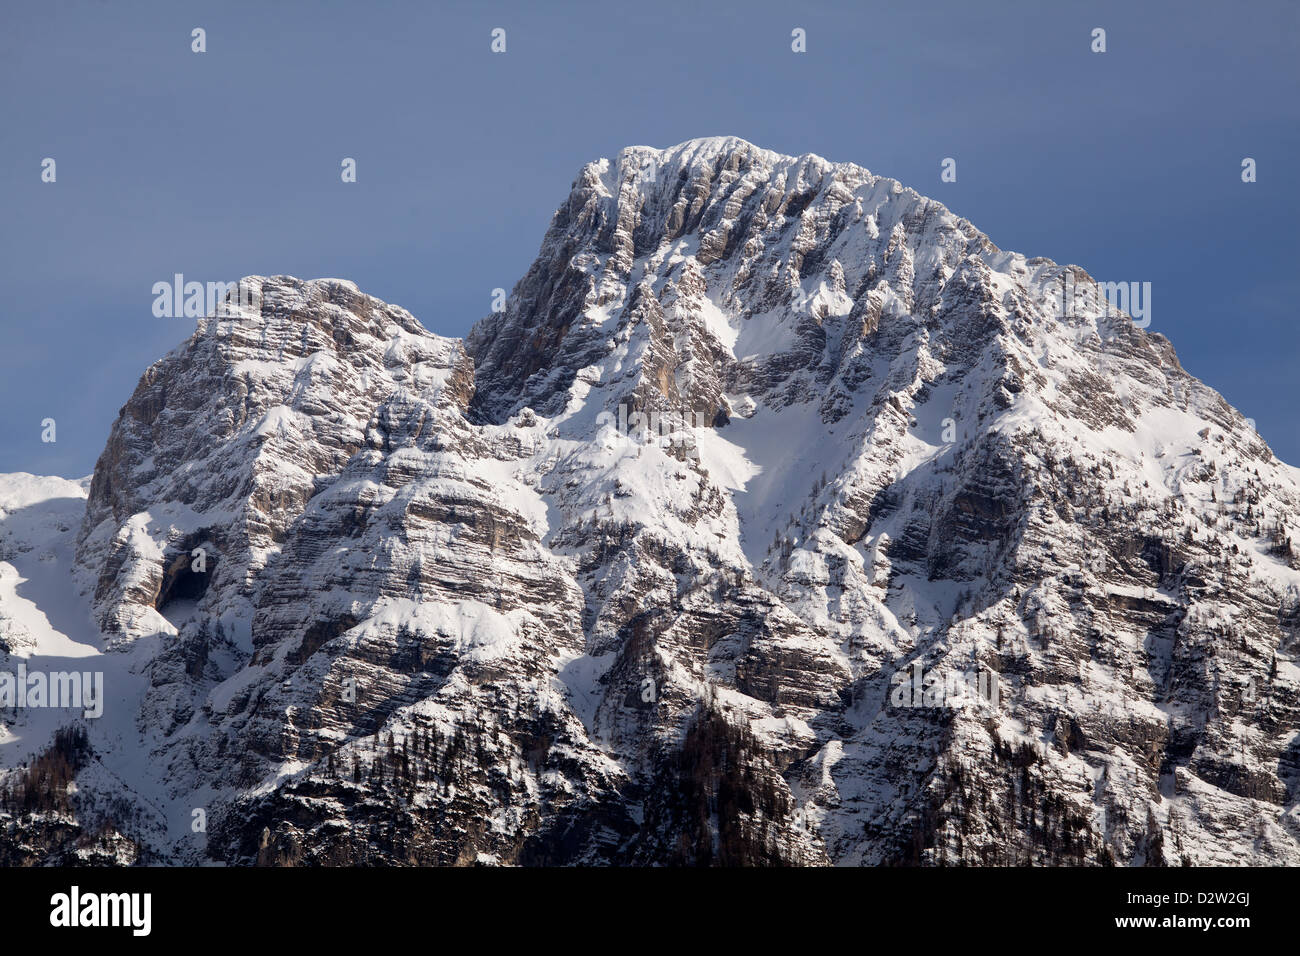 Snow-capped mountain Pihavec in the Julian Alps above the Trenta Valley Stock Photo